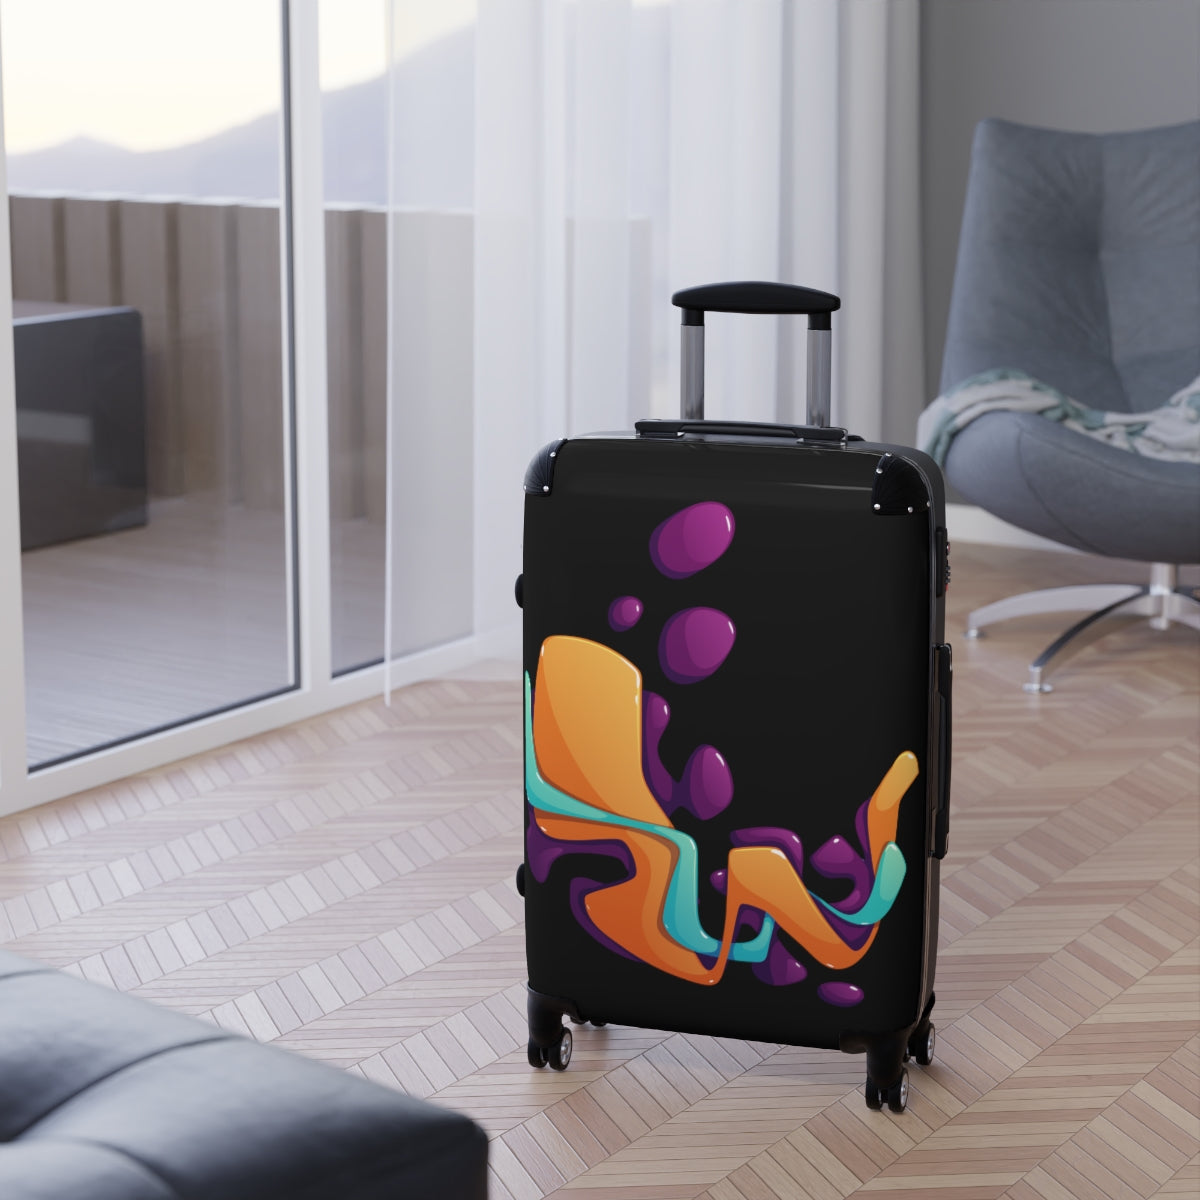  CARRY-ON LUGGAGE WITH BEAUTIFUL ARTISTIC DESIGN BY ARTZIRA, ALL SIZES, DOUBLE WHEELED SPINNER